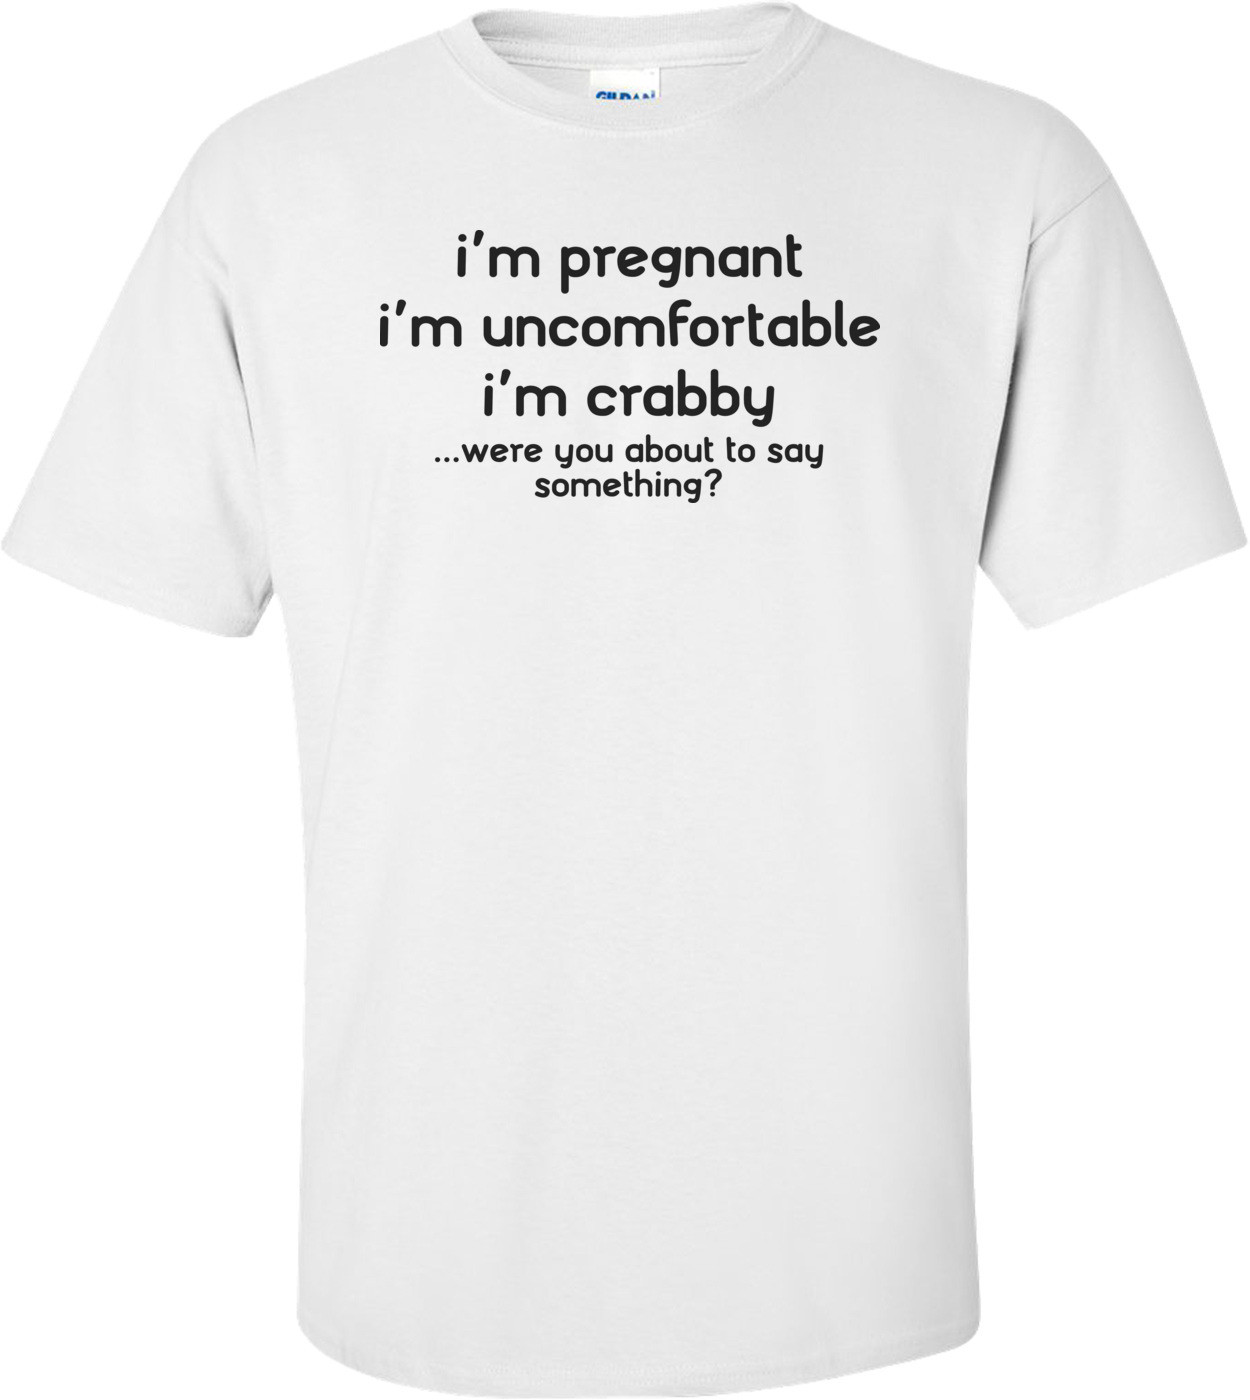 I'm Pregnant, Uncomfortable And Crabby, Were You About To Say Something?  Funny Pregnancy Shirt